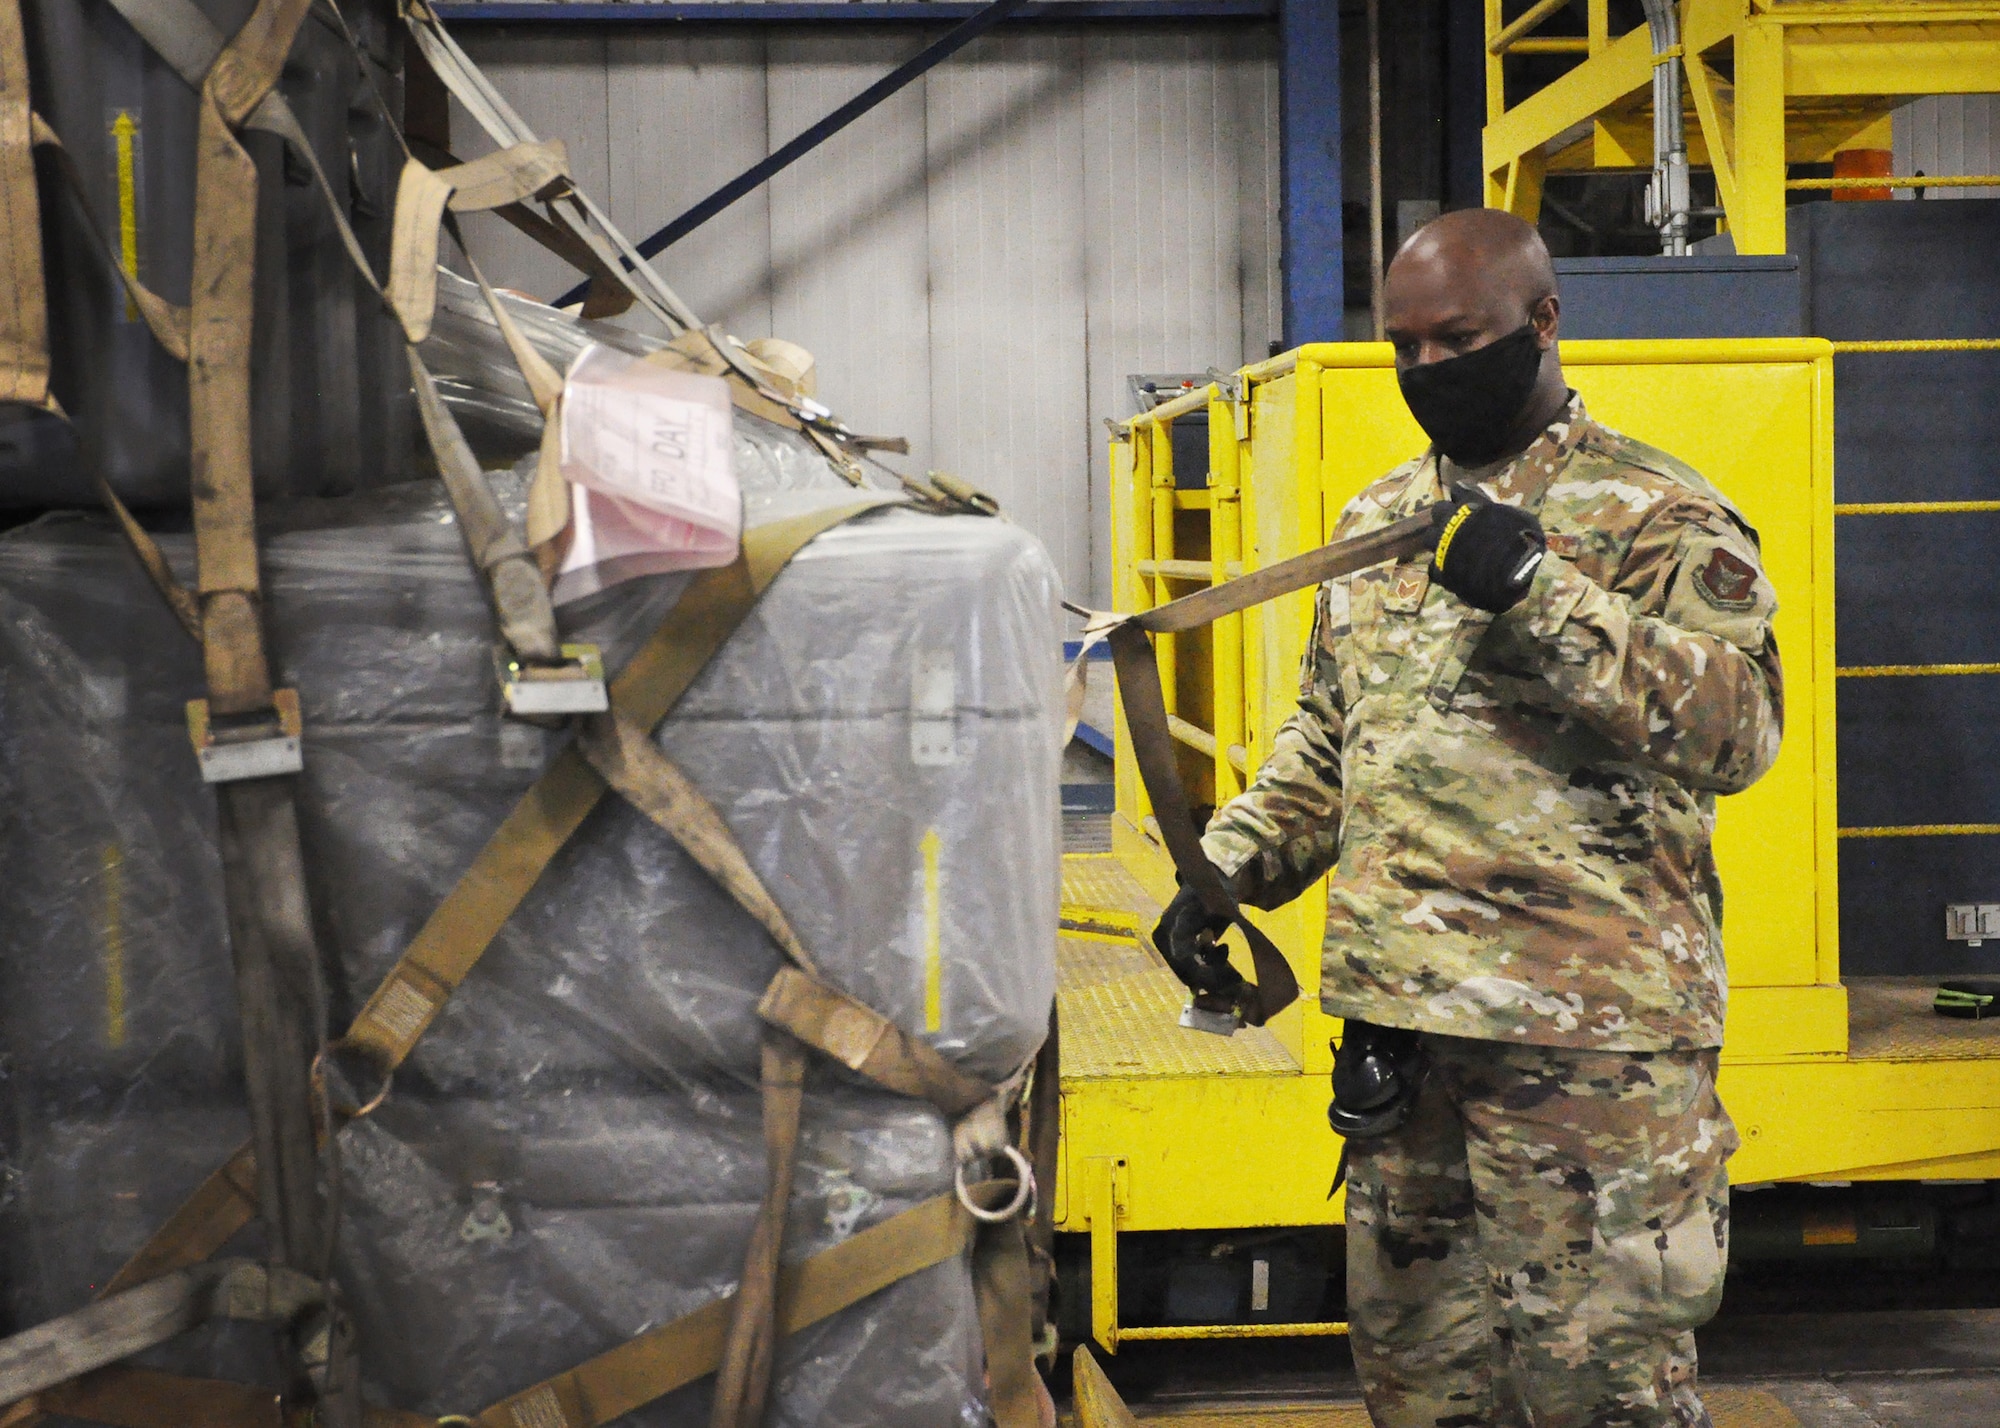 Staff Sgt. Dylan Lewis-Lee, 87th Aerial Port Squadron ramp operations specialist, tightens the net on a training pallet during the 87th Aerial Port Squadron’s semi-annual Port Dawg Challenge Oct. 17, 2020. Cargo is prepared for military airlift using strict guidelines based on weight, height, shape and transportation priority, so Port Dawgs must be proficient in numerous methods of securing cargo with nets, chains and straps.